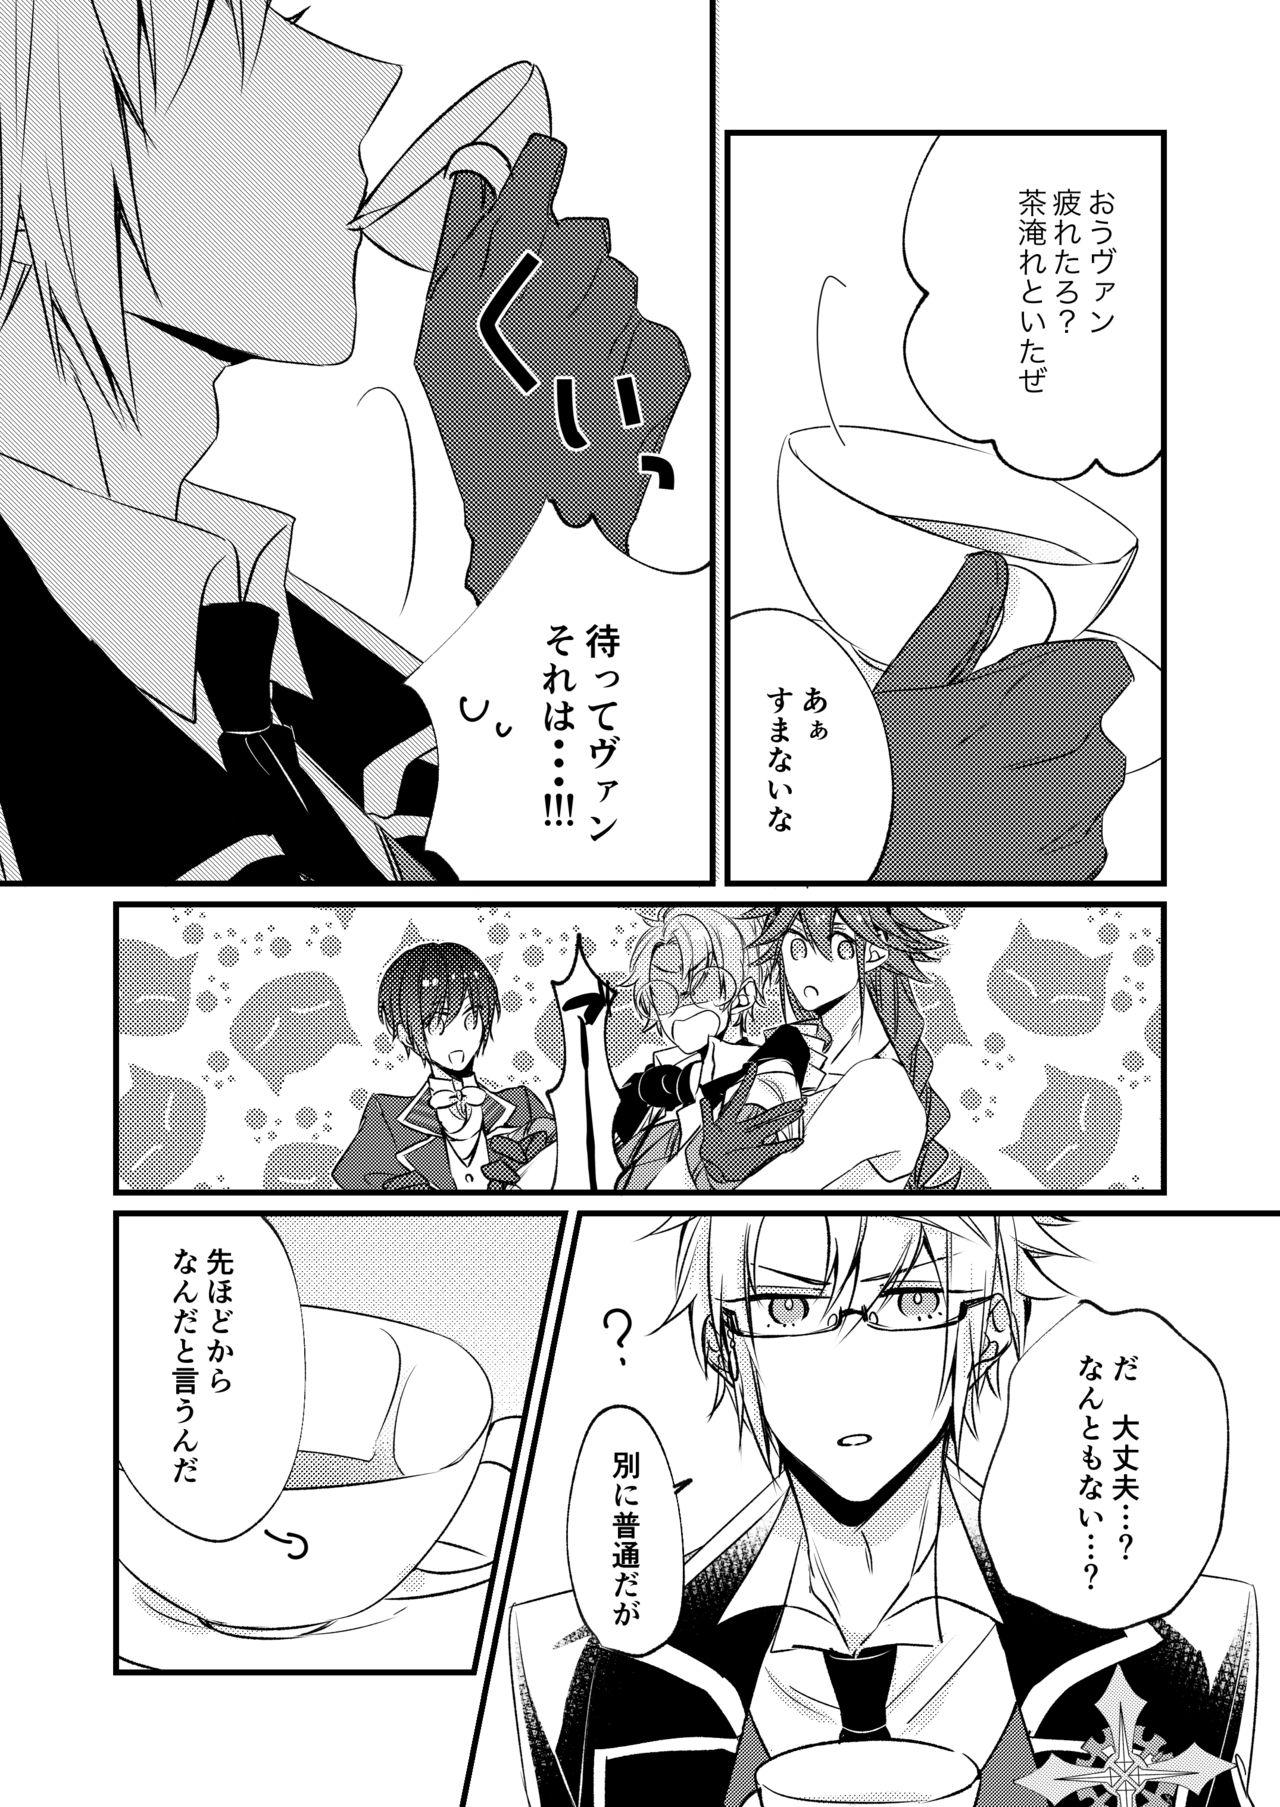 18yearsold 熱におぼれる - Code realize sousei no himegimi Curves - Page 6